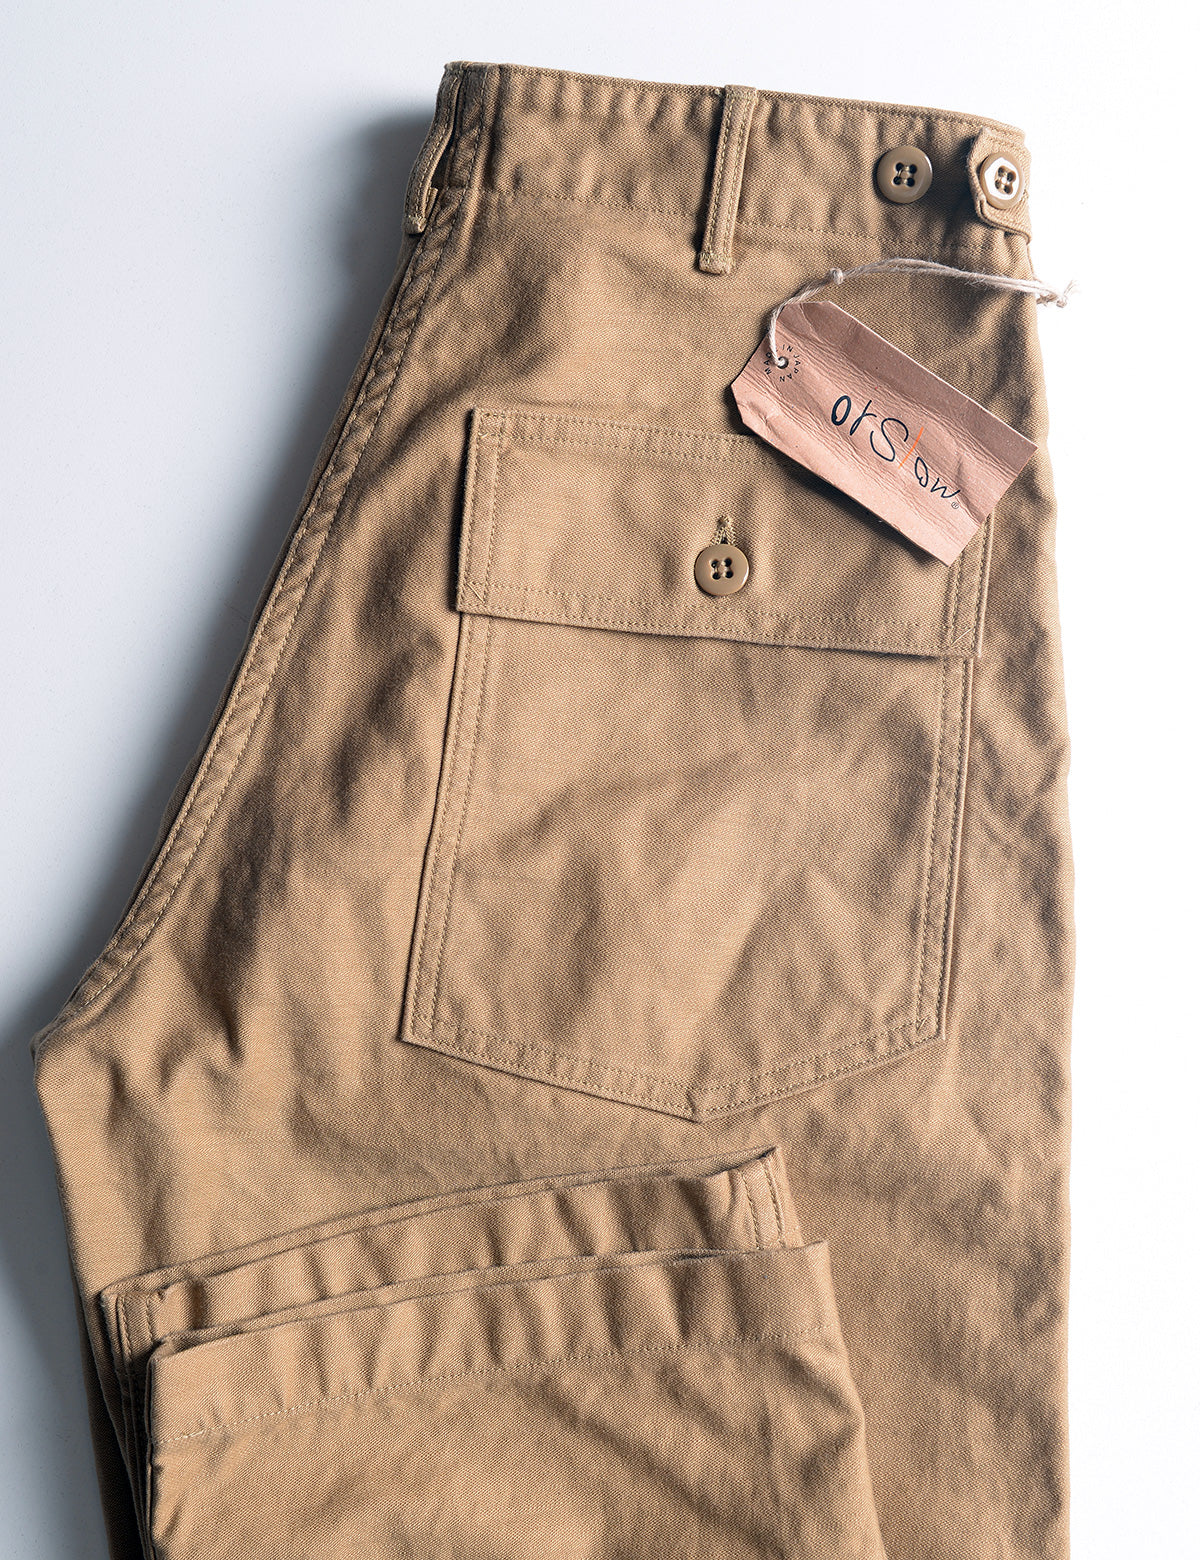 Detail shot of Orslow US Army Fatigue Trousers - Khaki back pocket